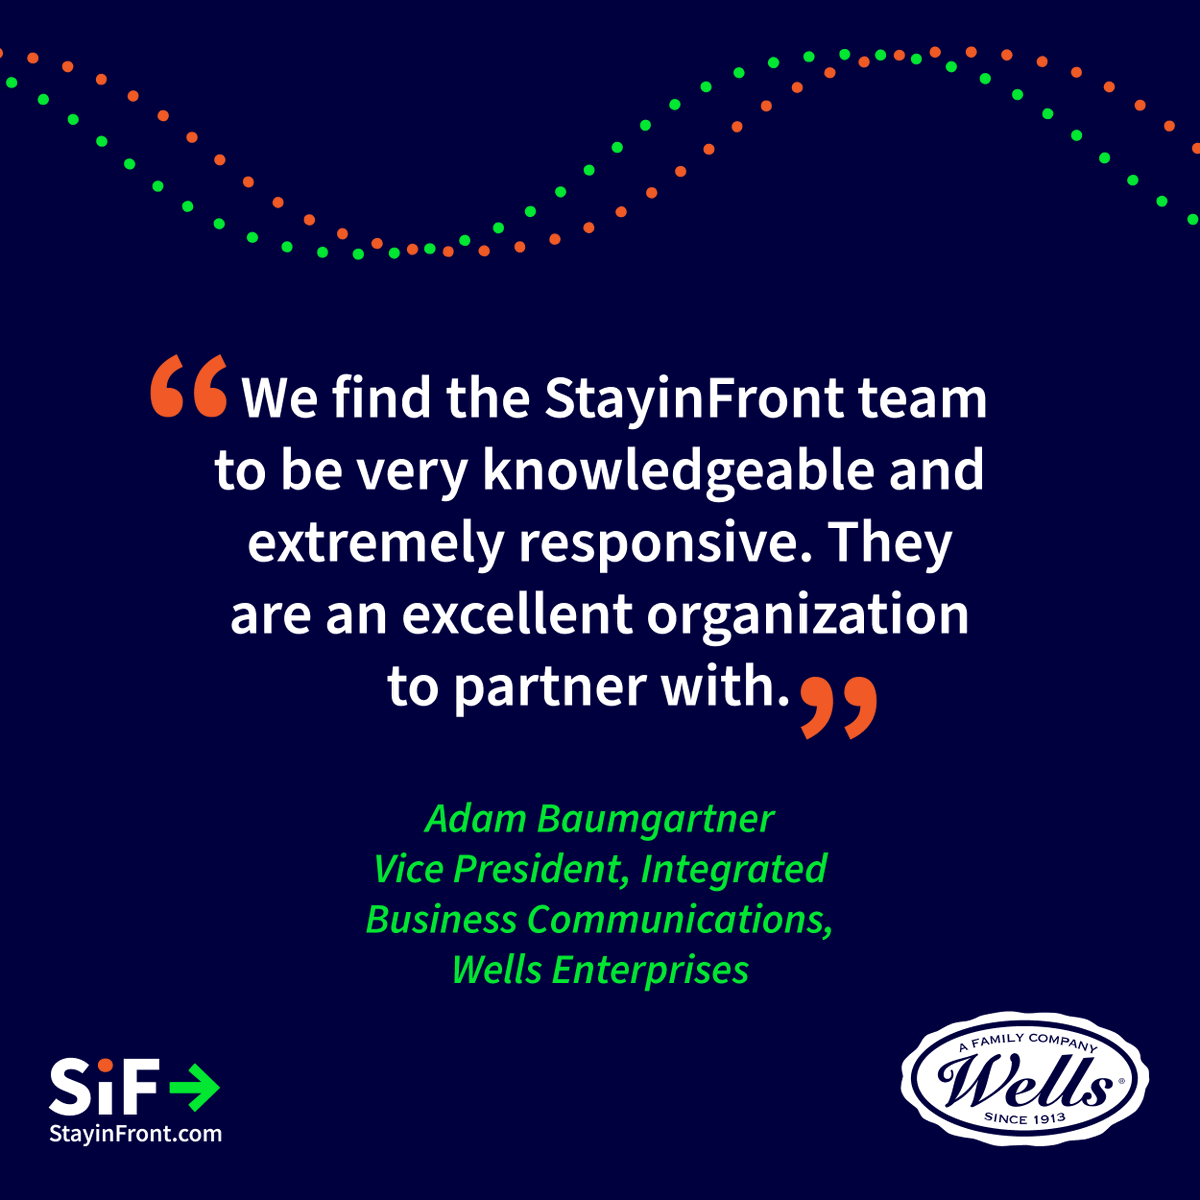 Great feedback from Adam Baumgartner at Well’s Enterprises. Contact our sales team today at sales@stayinfront.com to find out how we can help you reach your retail execution goals and drive growth.

#CustomerSuccess #RetailExecution #DrivingGrowth